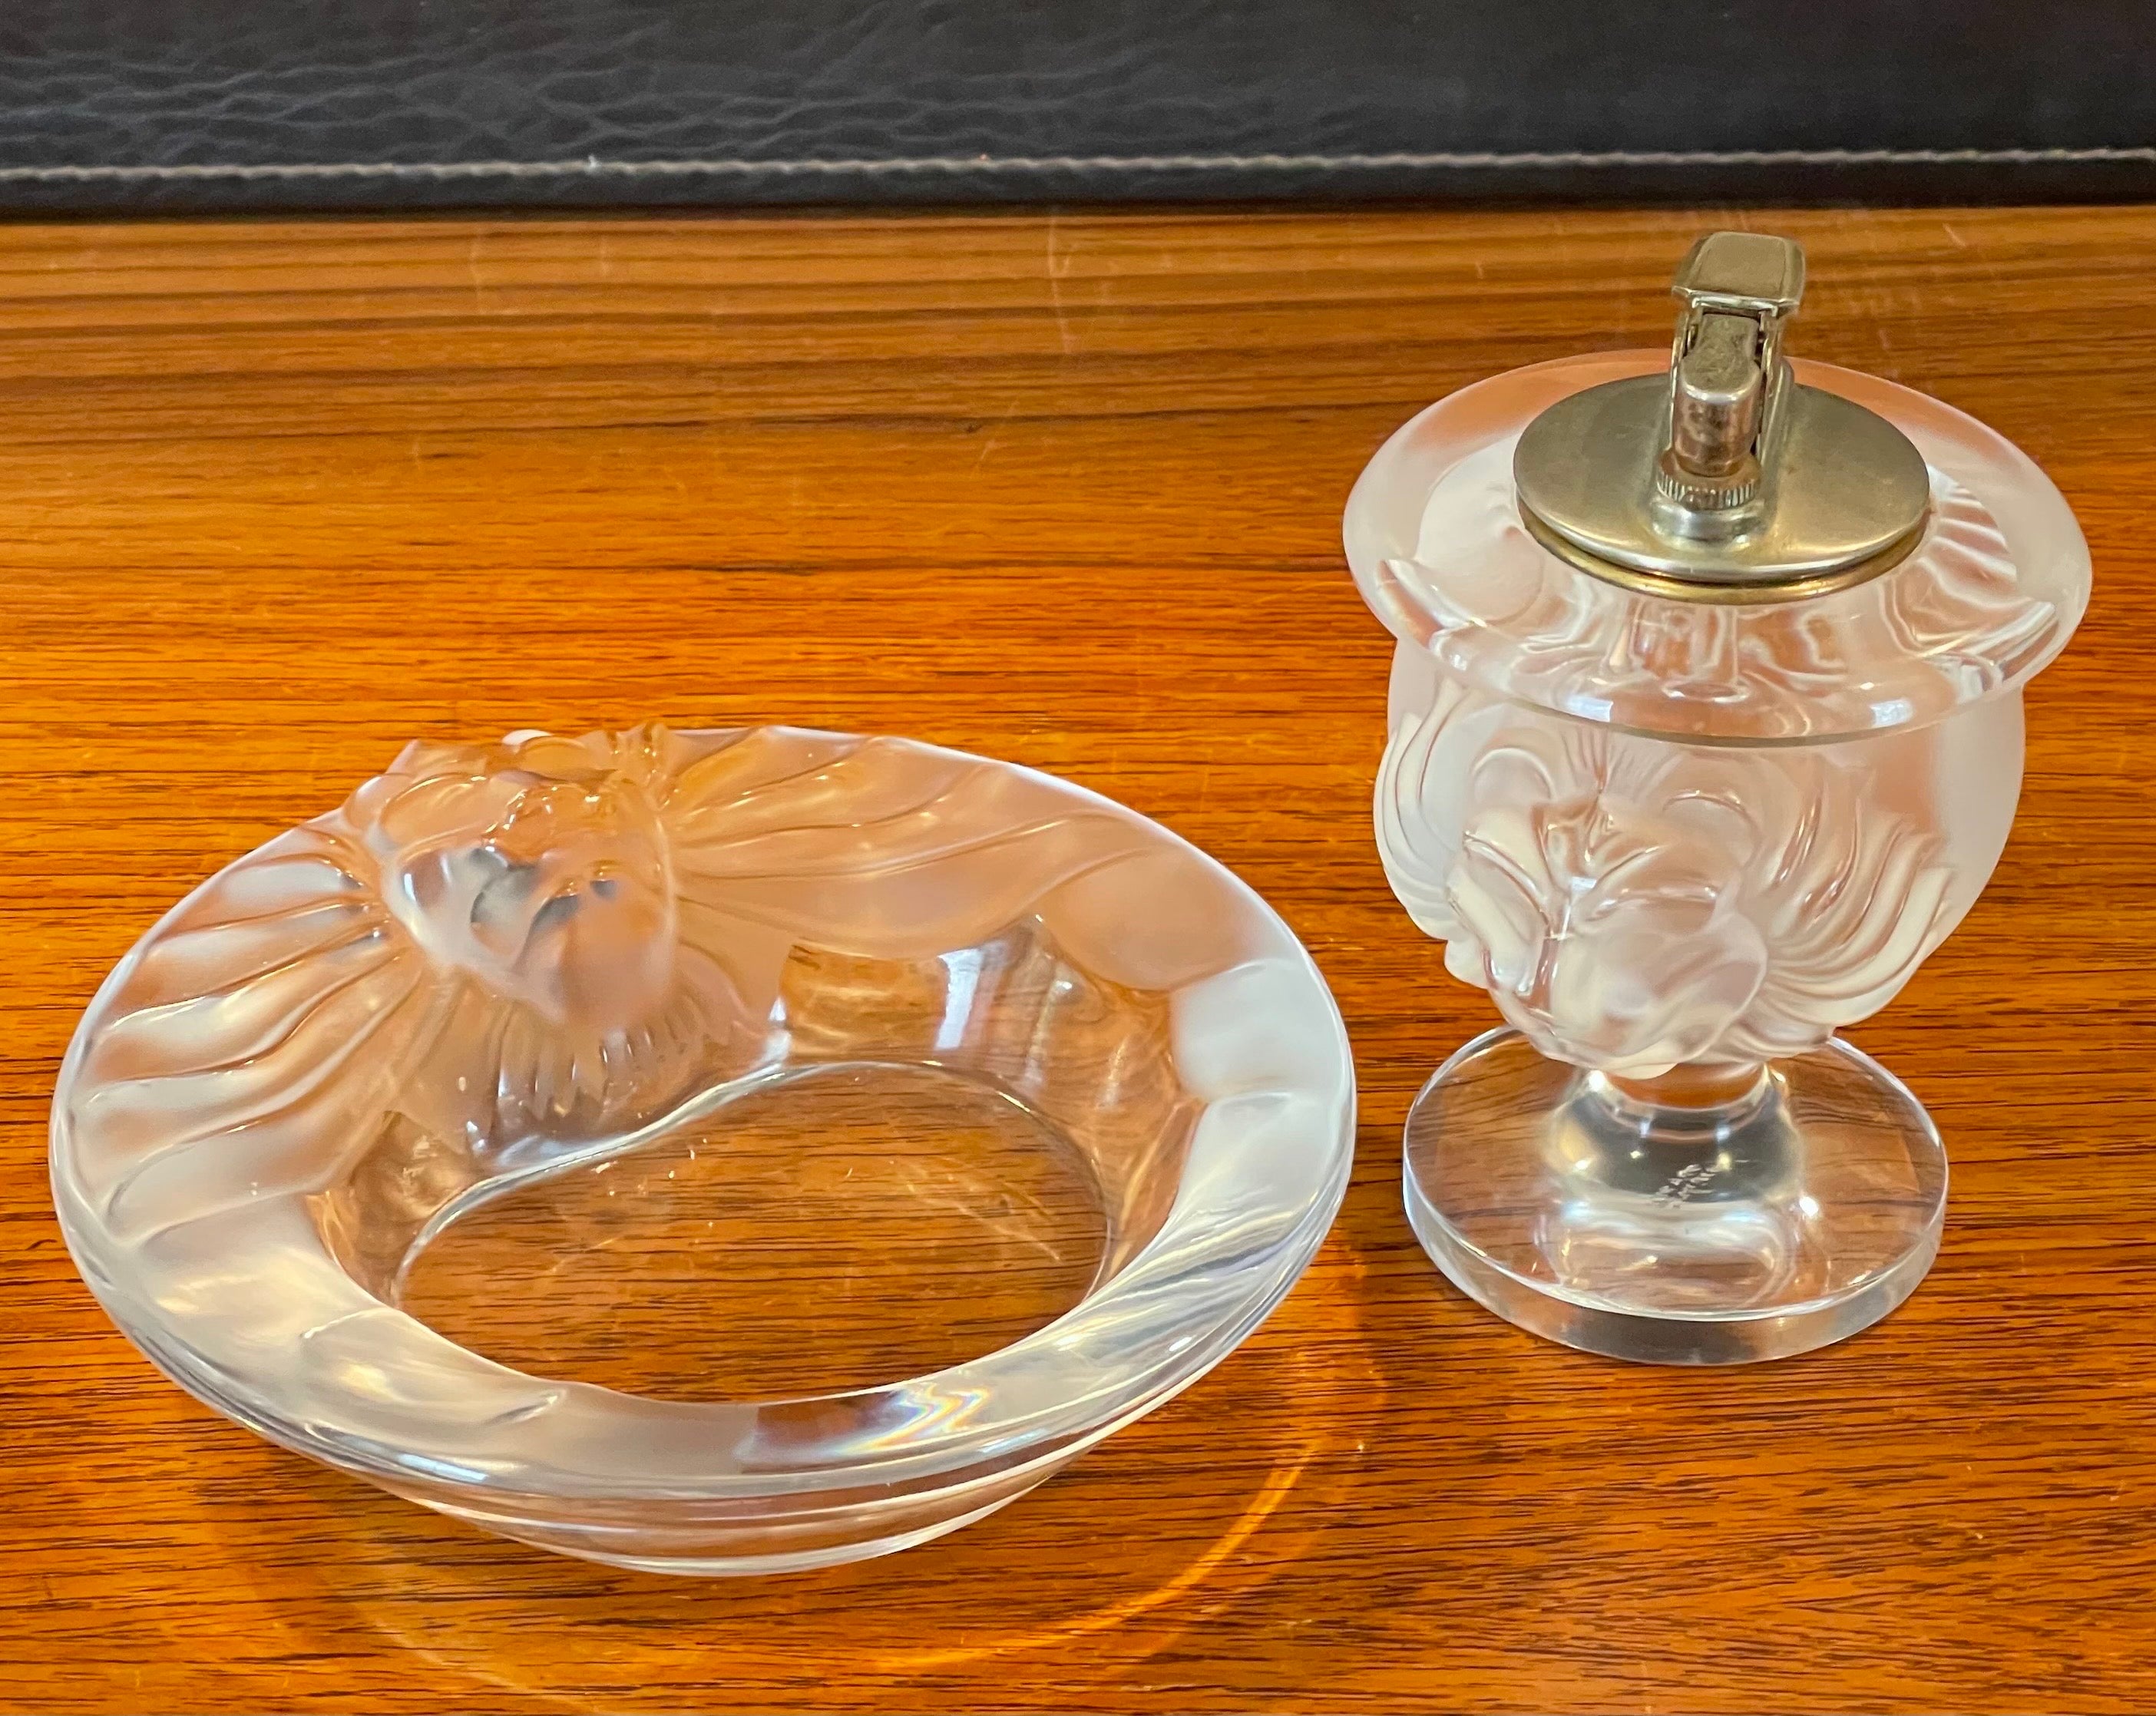 Gorgeous lion head frosted crystal ashtray and lighter set by Lalique of France, circa 1990s. This stunning set features a raised lion head with contrast in clear and frosted texture. The ashtray measures 5.75